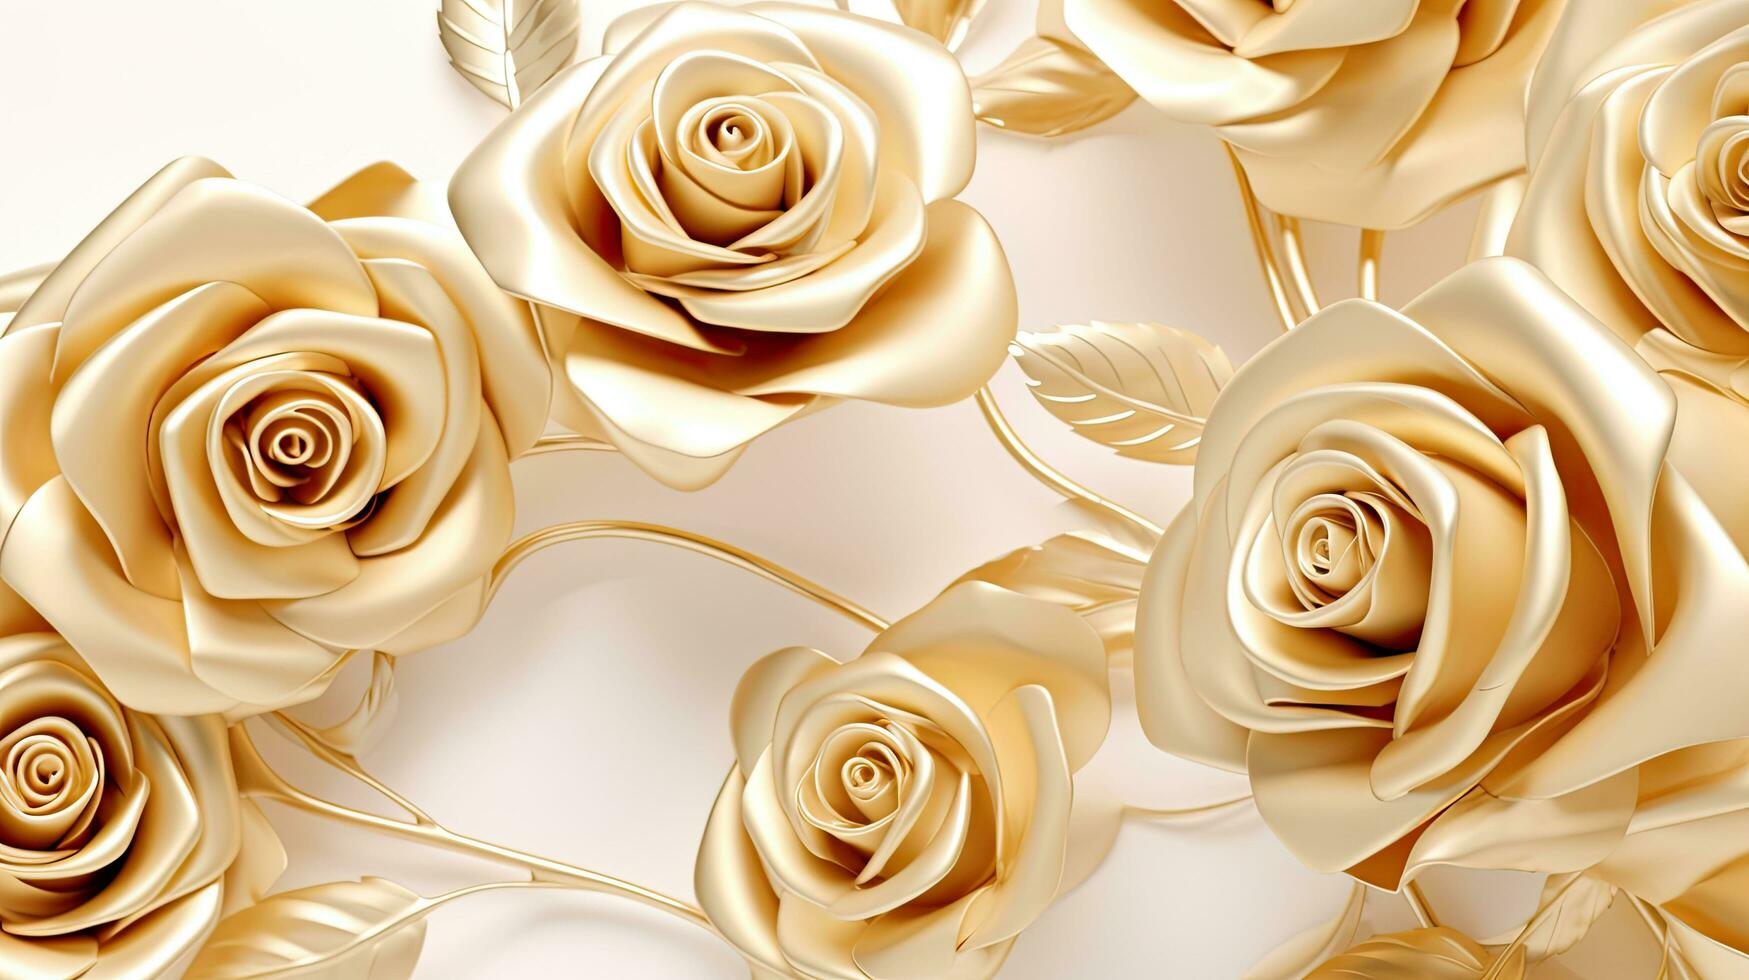 Light Effect Plant Flower Background Gorgeous Gold, Light Effect, Plant,  Floral Background Background Image And Wallpaper for Free Download